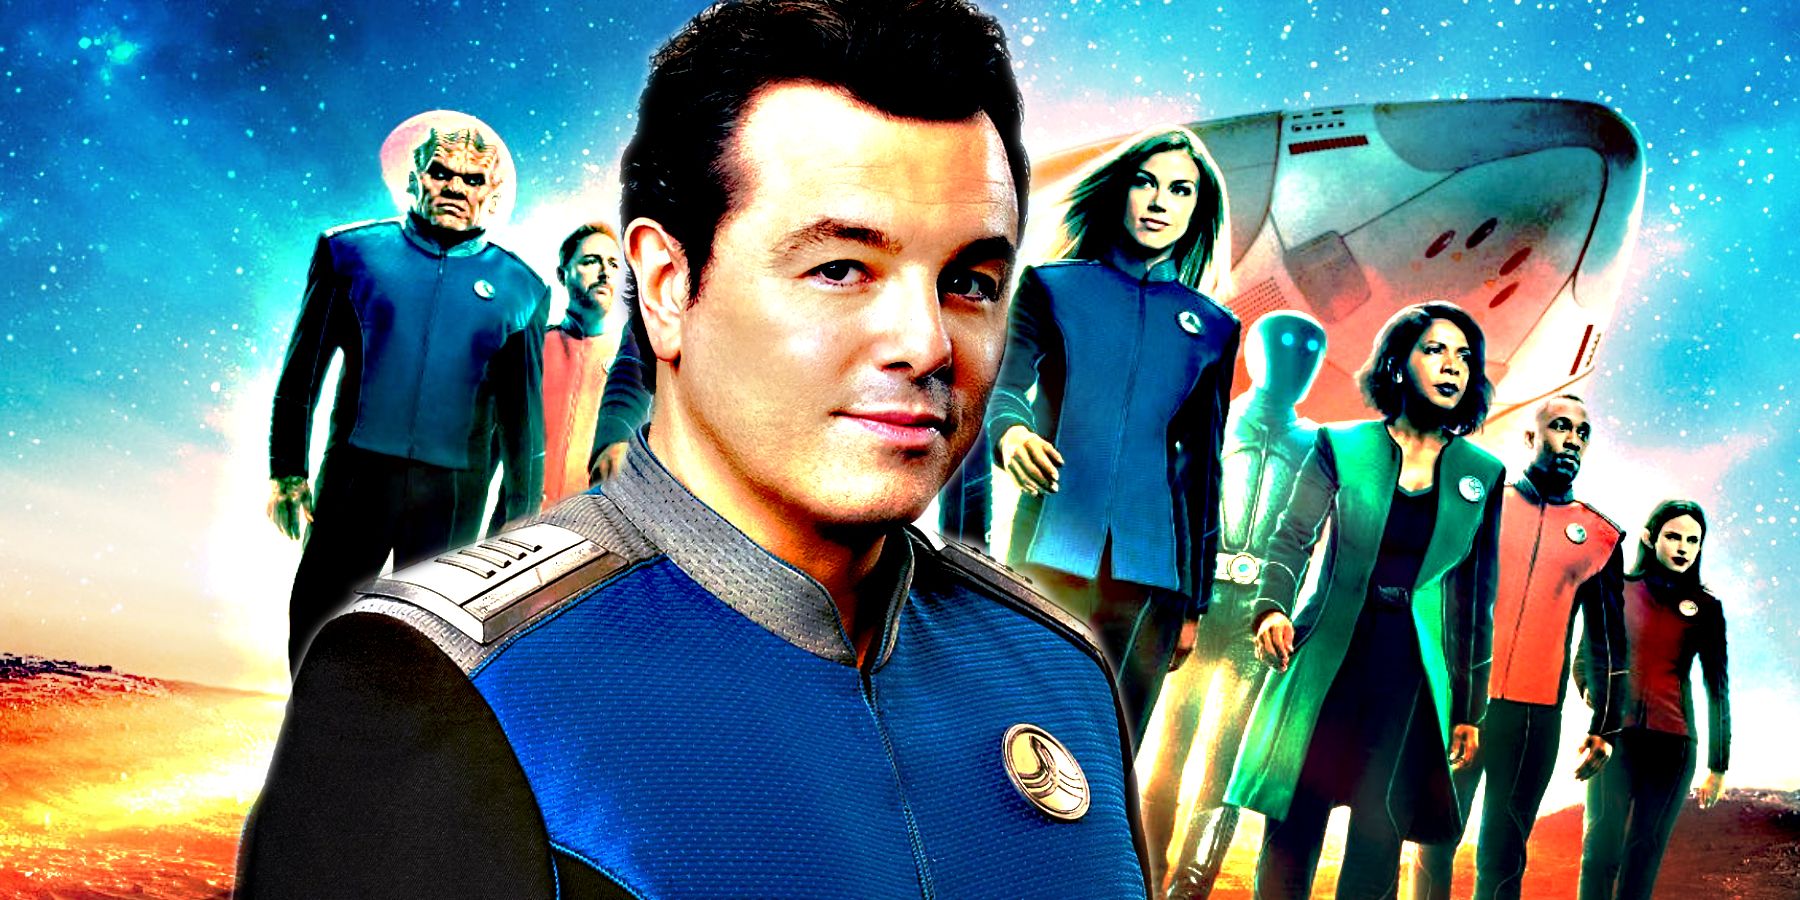 Seth McFarlane and the cast of The Orville